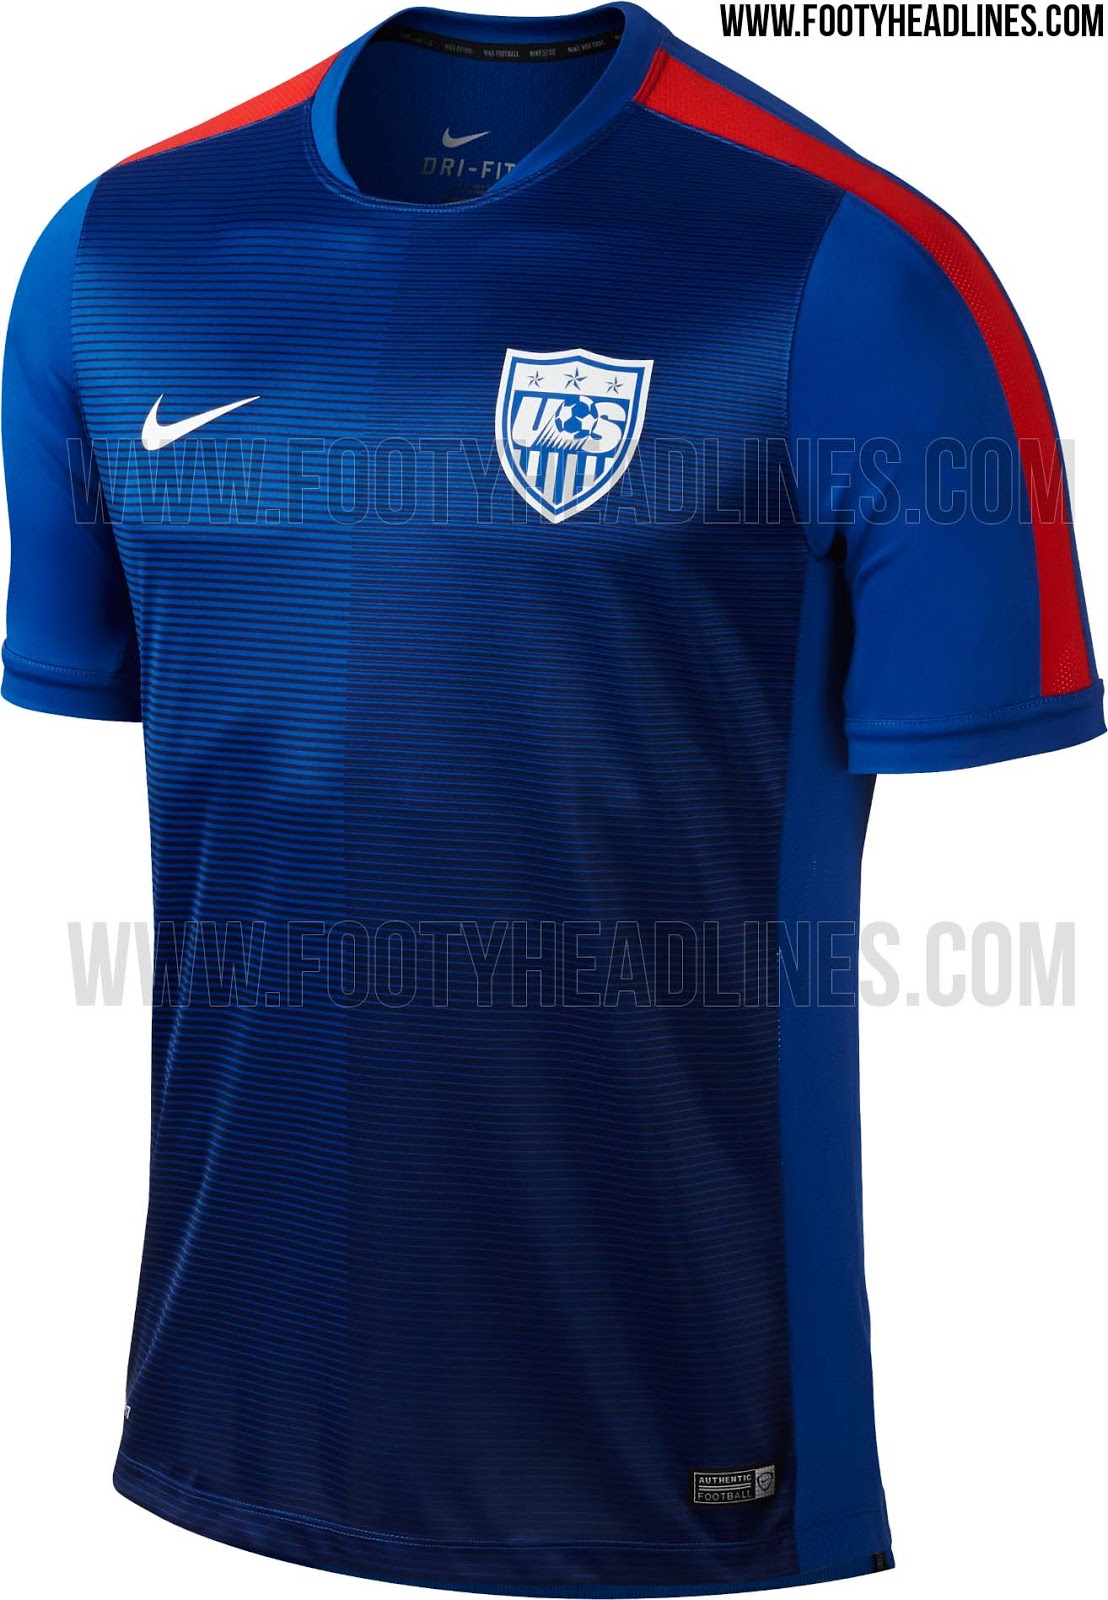 USA 2015 Pre-Match and Training Shirts Released - Footy Headlines